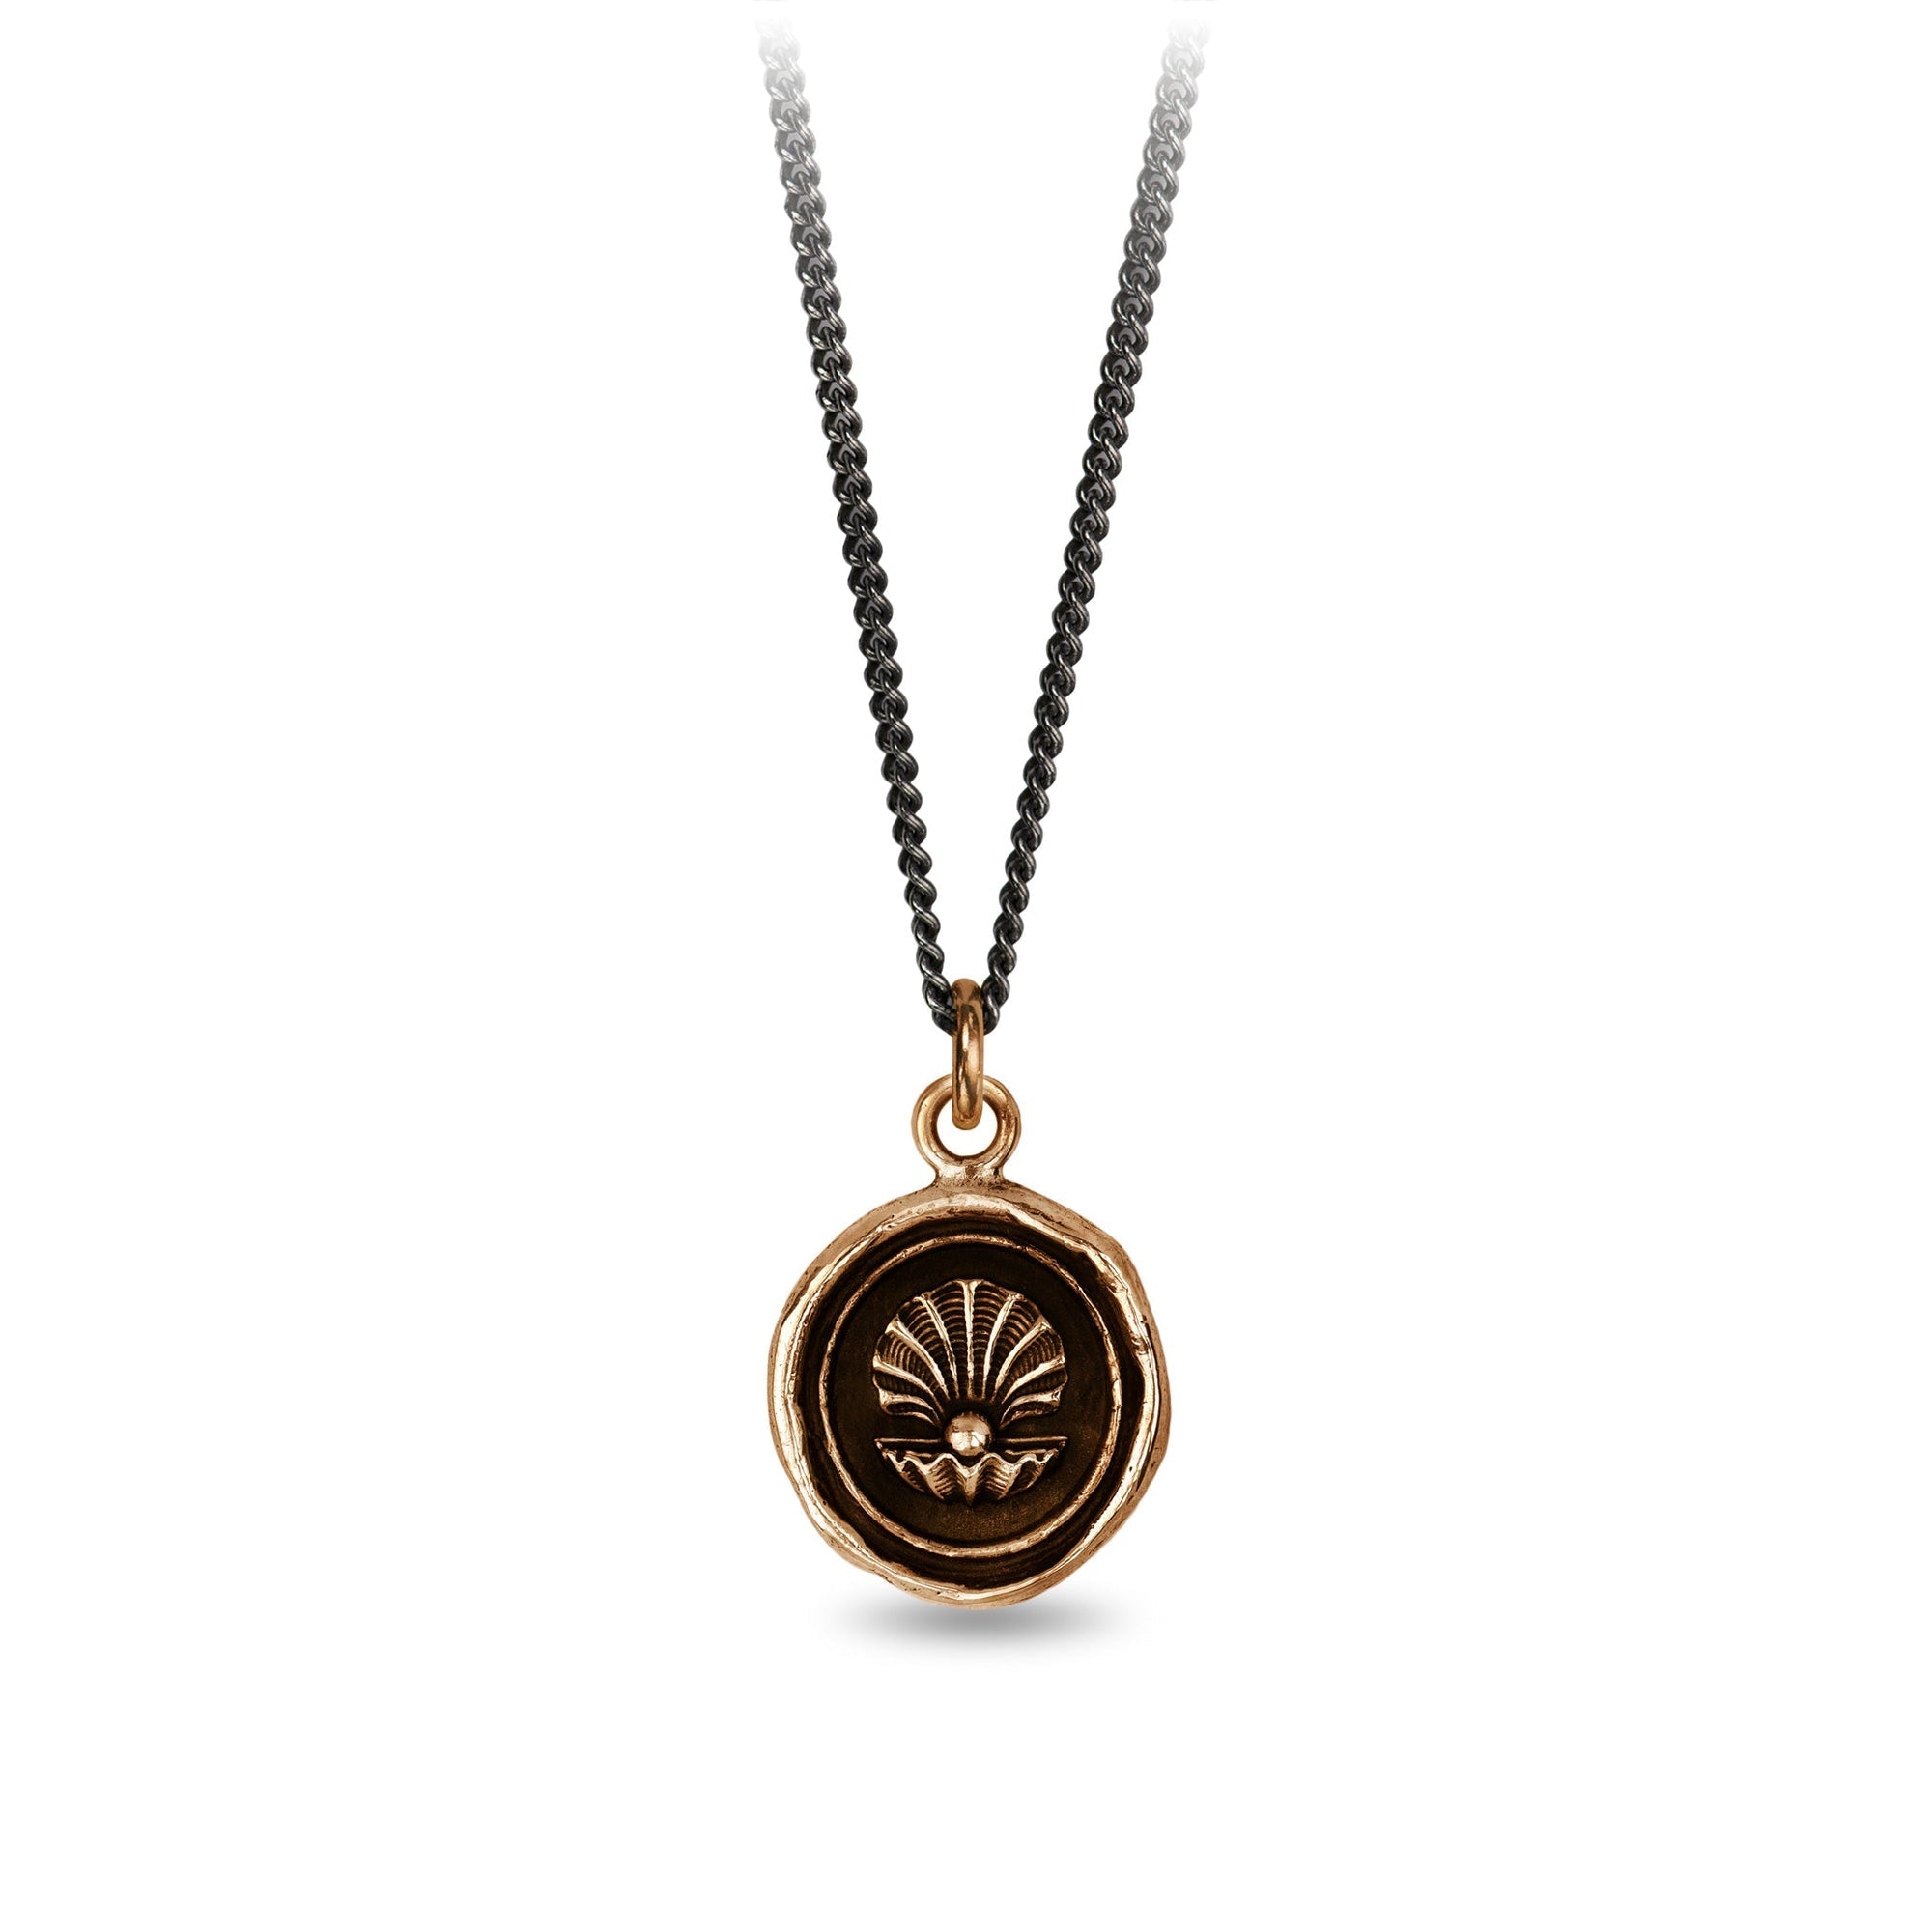 The World is Your Oyster Talisman Necklace